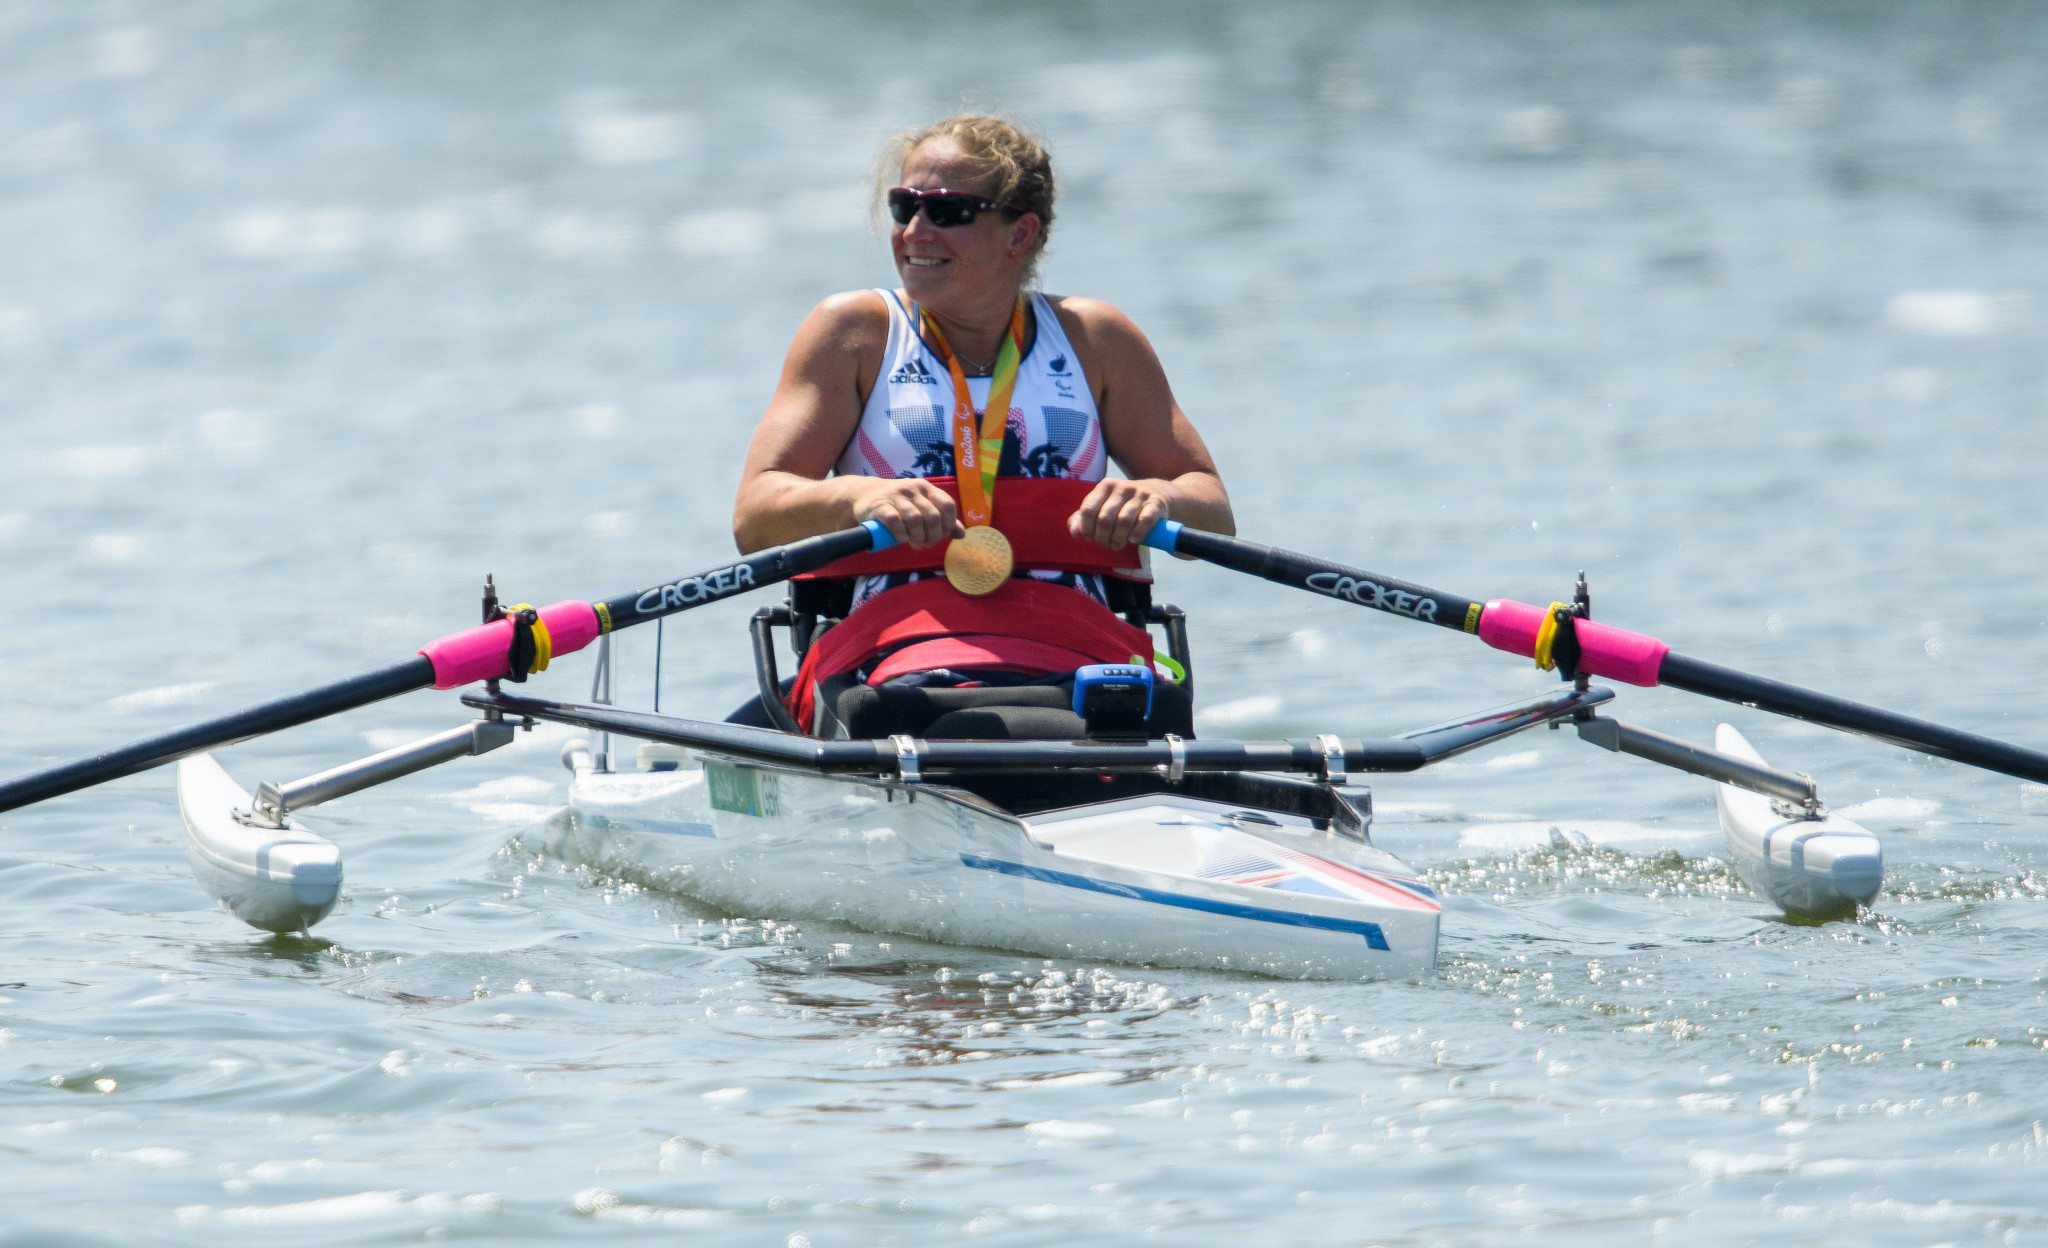 Rachel Morris won gold in the women's single sculls at Rio 2016 ©Getty Images